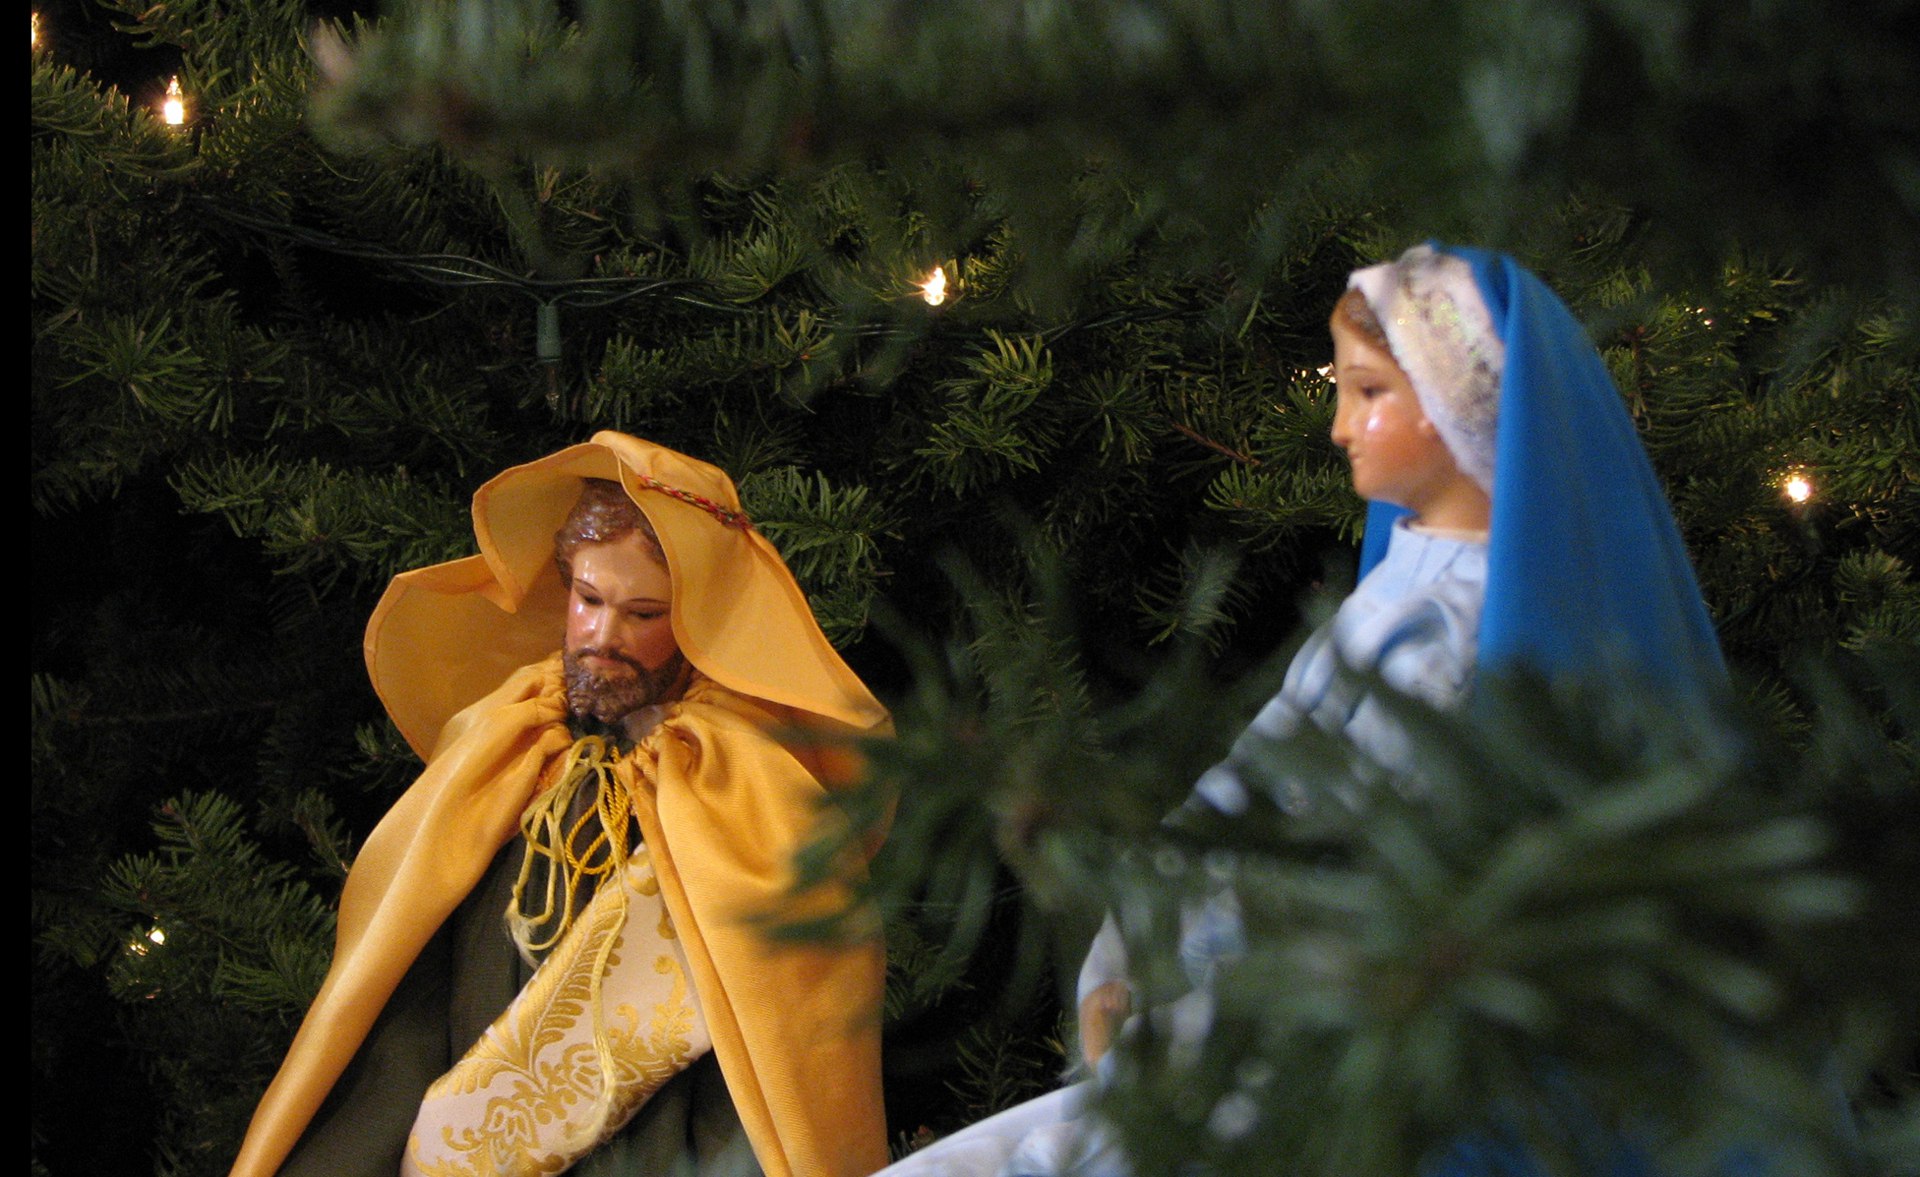 St. Joseph and Mary figurines in a Christmas tree